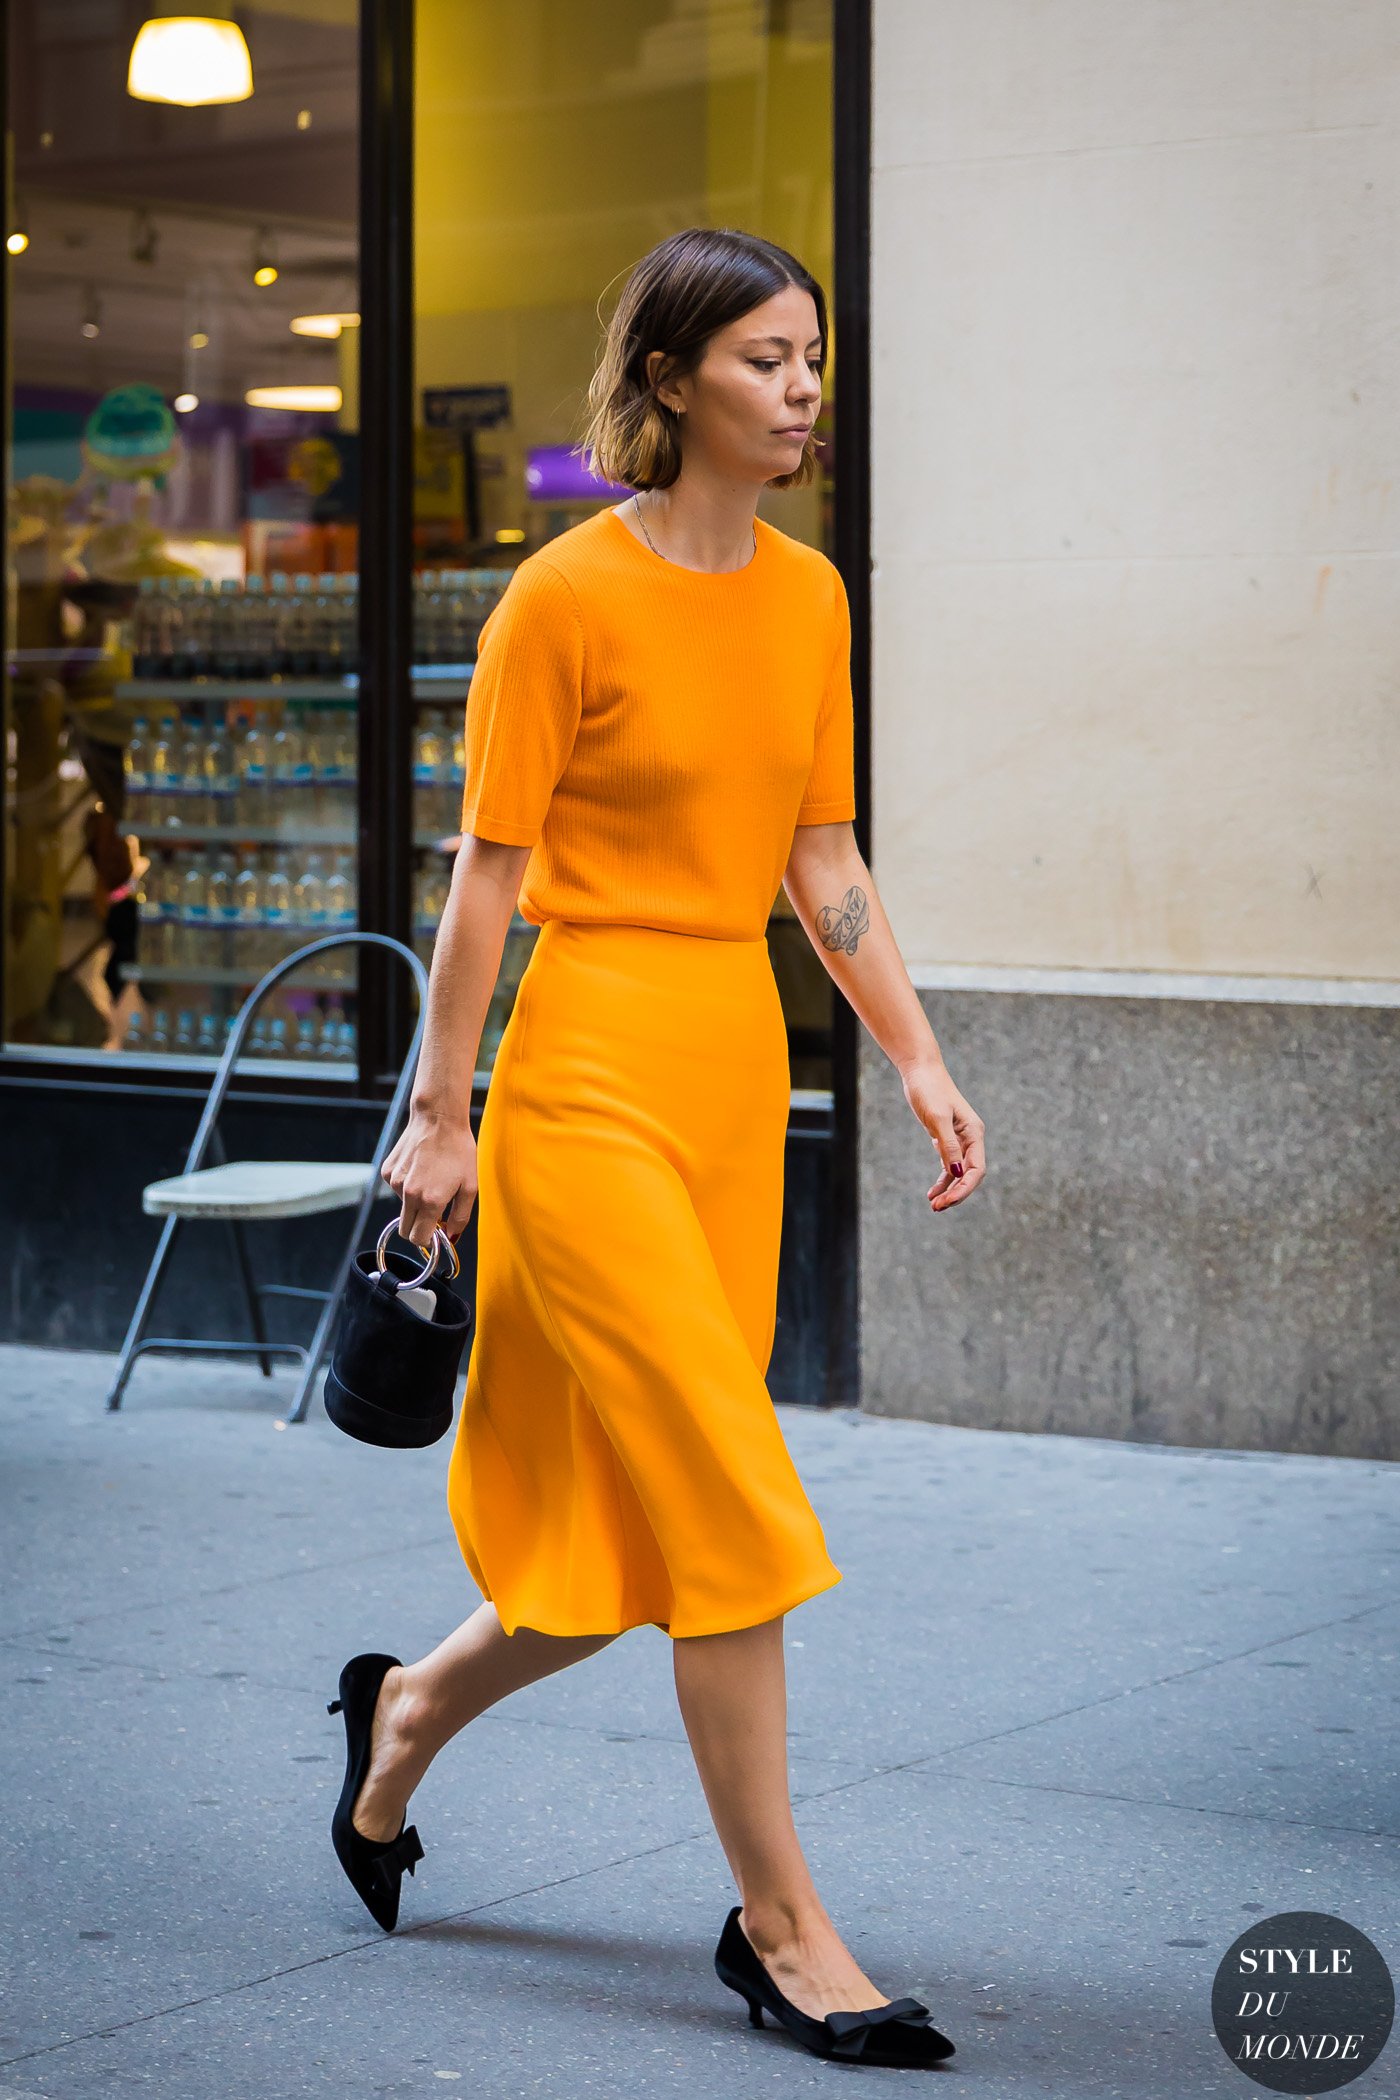 Image for New York SS 2018 Street Style: Annina Mislin